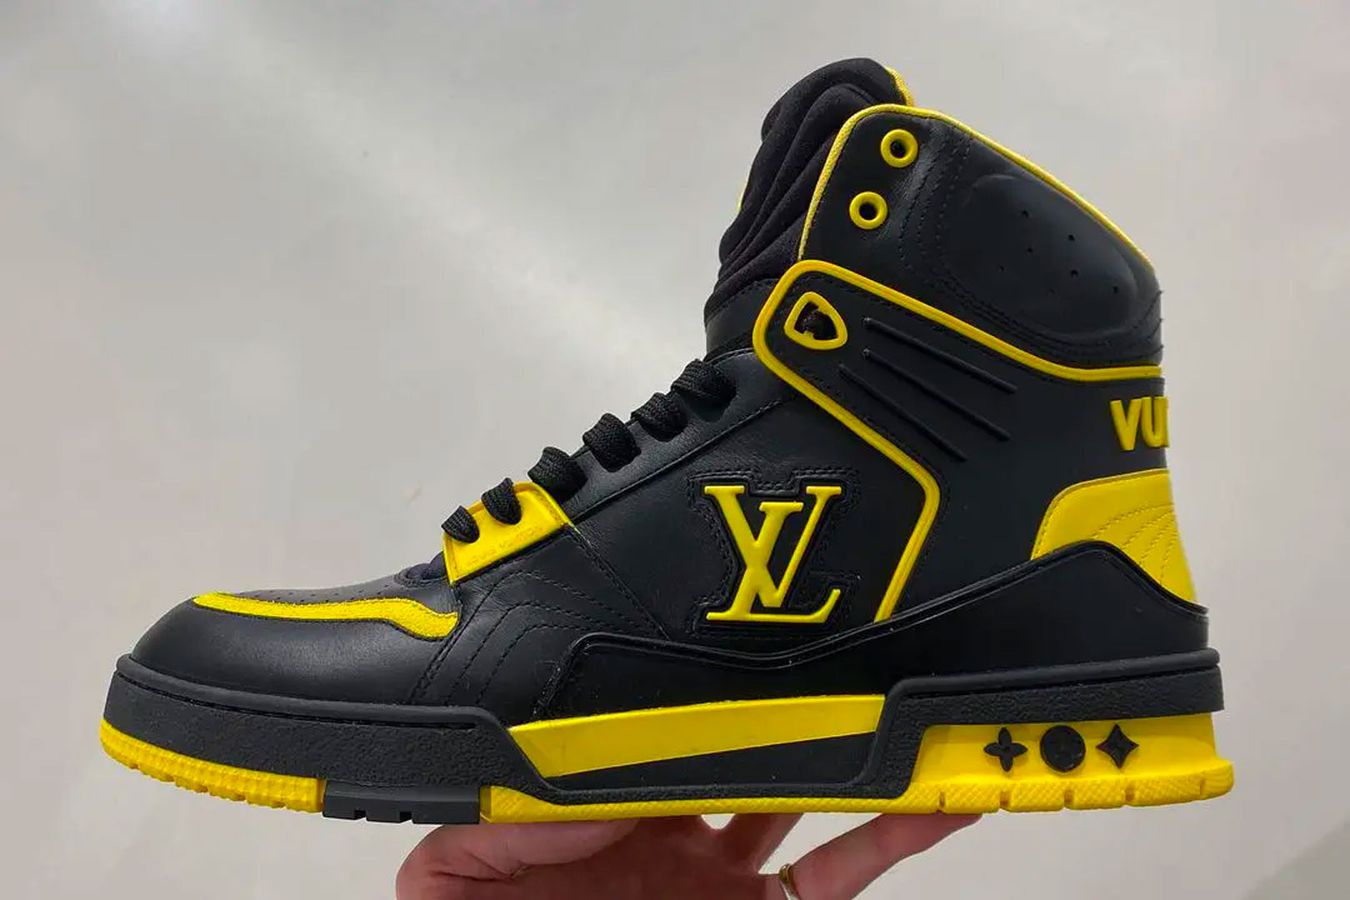 Louis Vuitton High 8 product image of a black and yellow high-top.